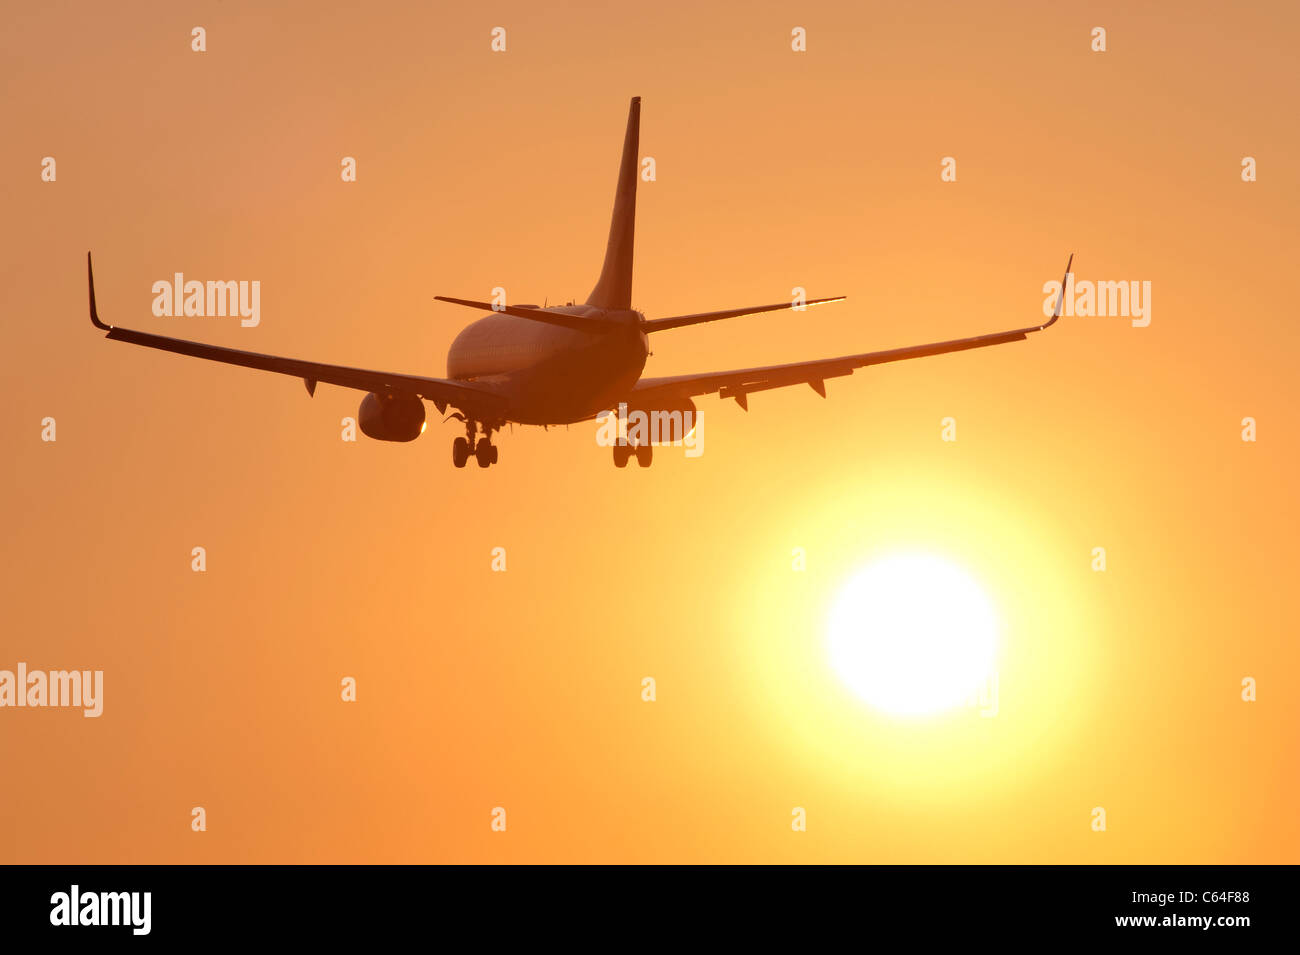 Airplane with jet engines with sunset in the background Stock Photo